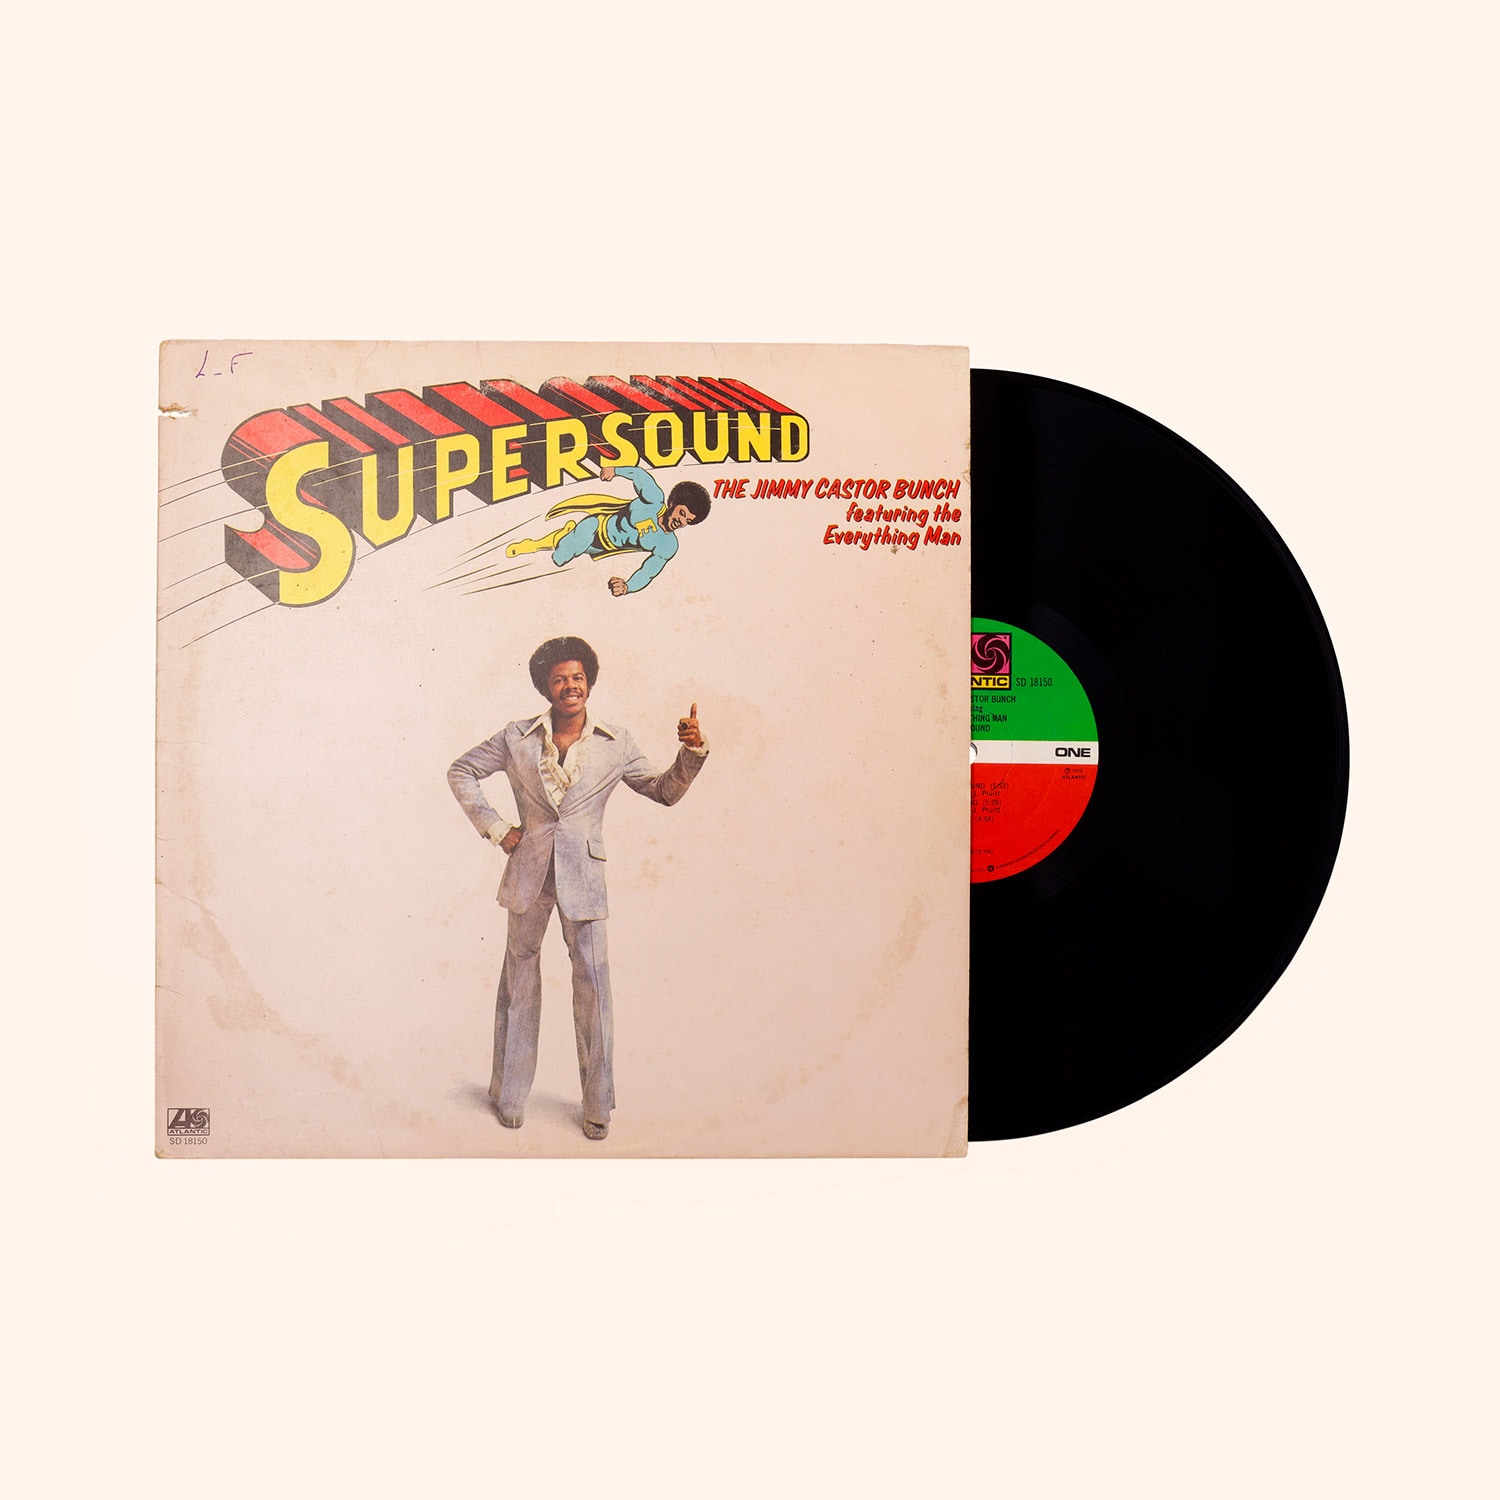 Vinyle The Jimmy Castor Bunch - Supersound